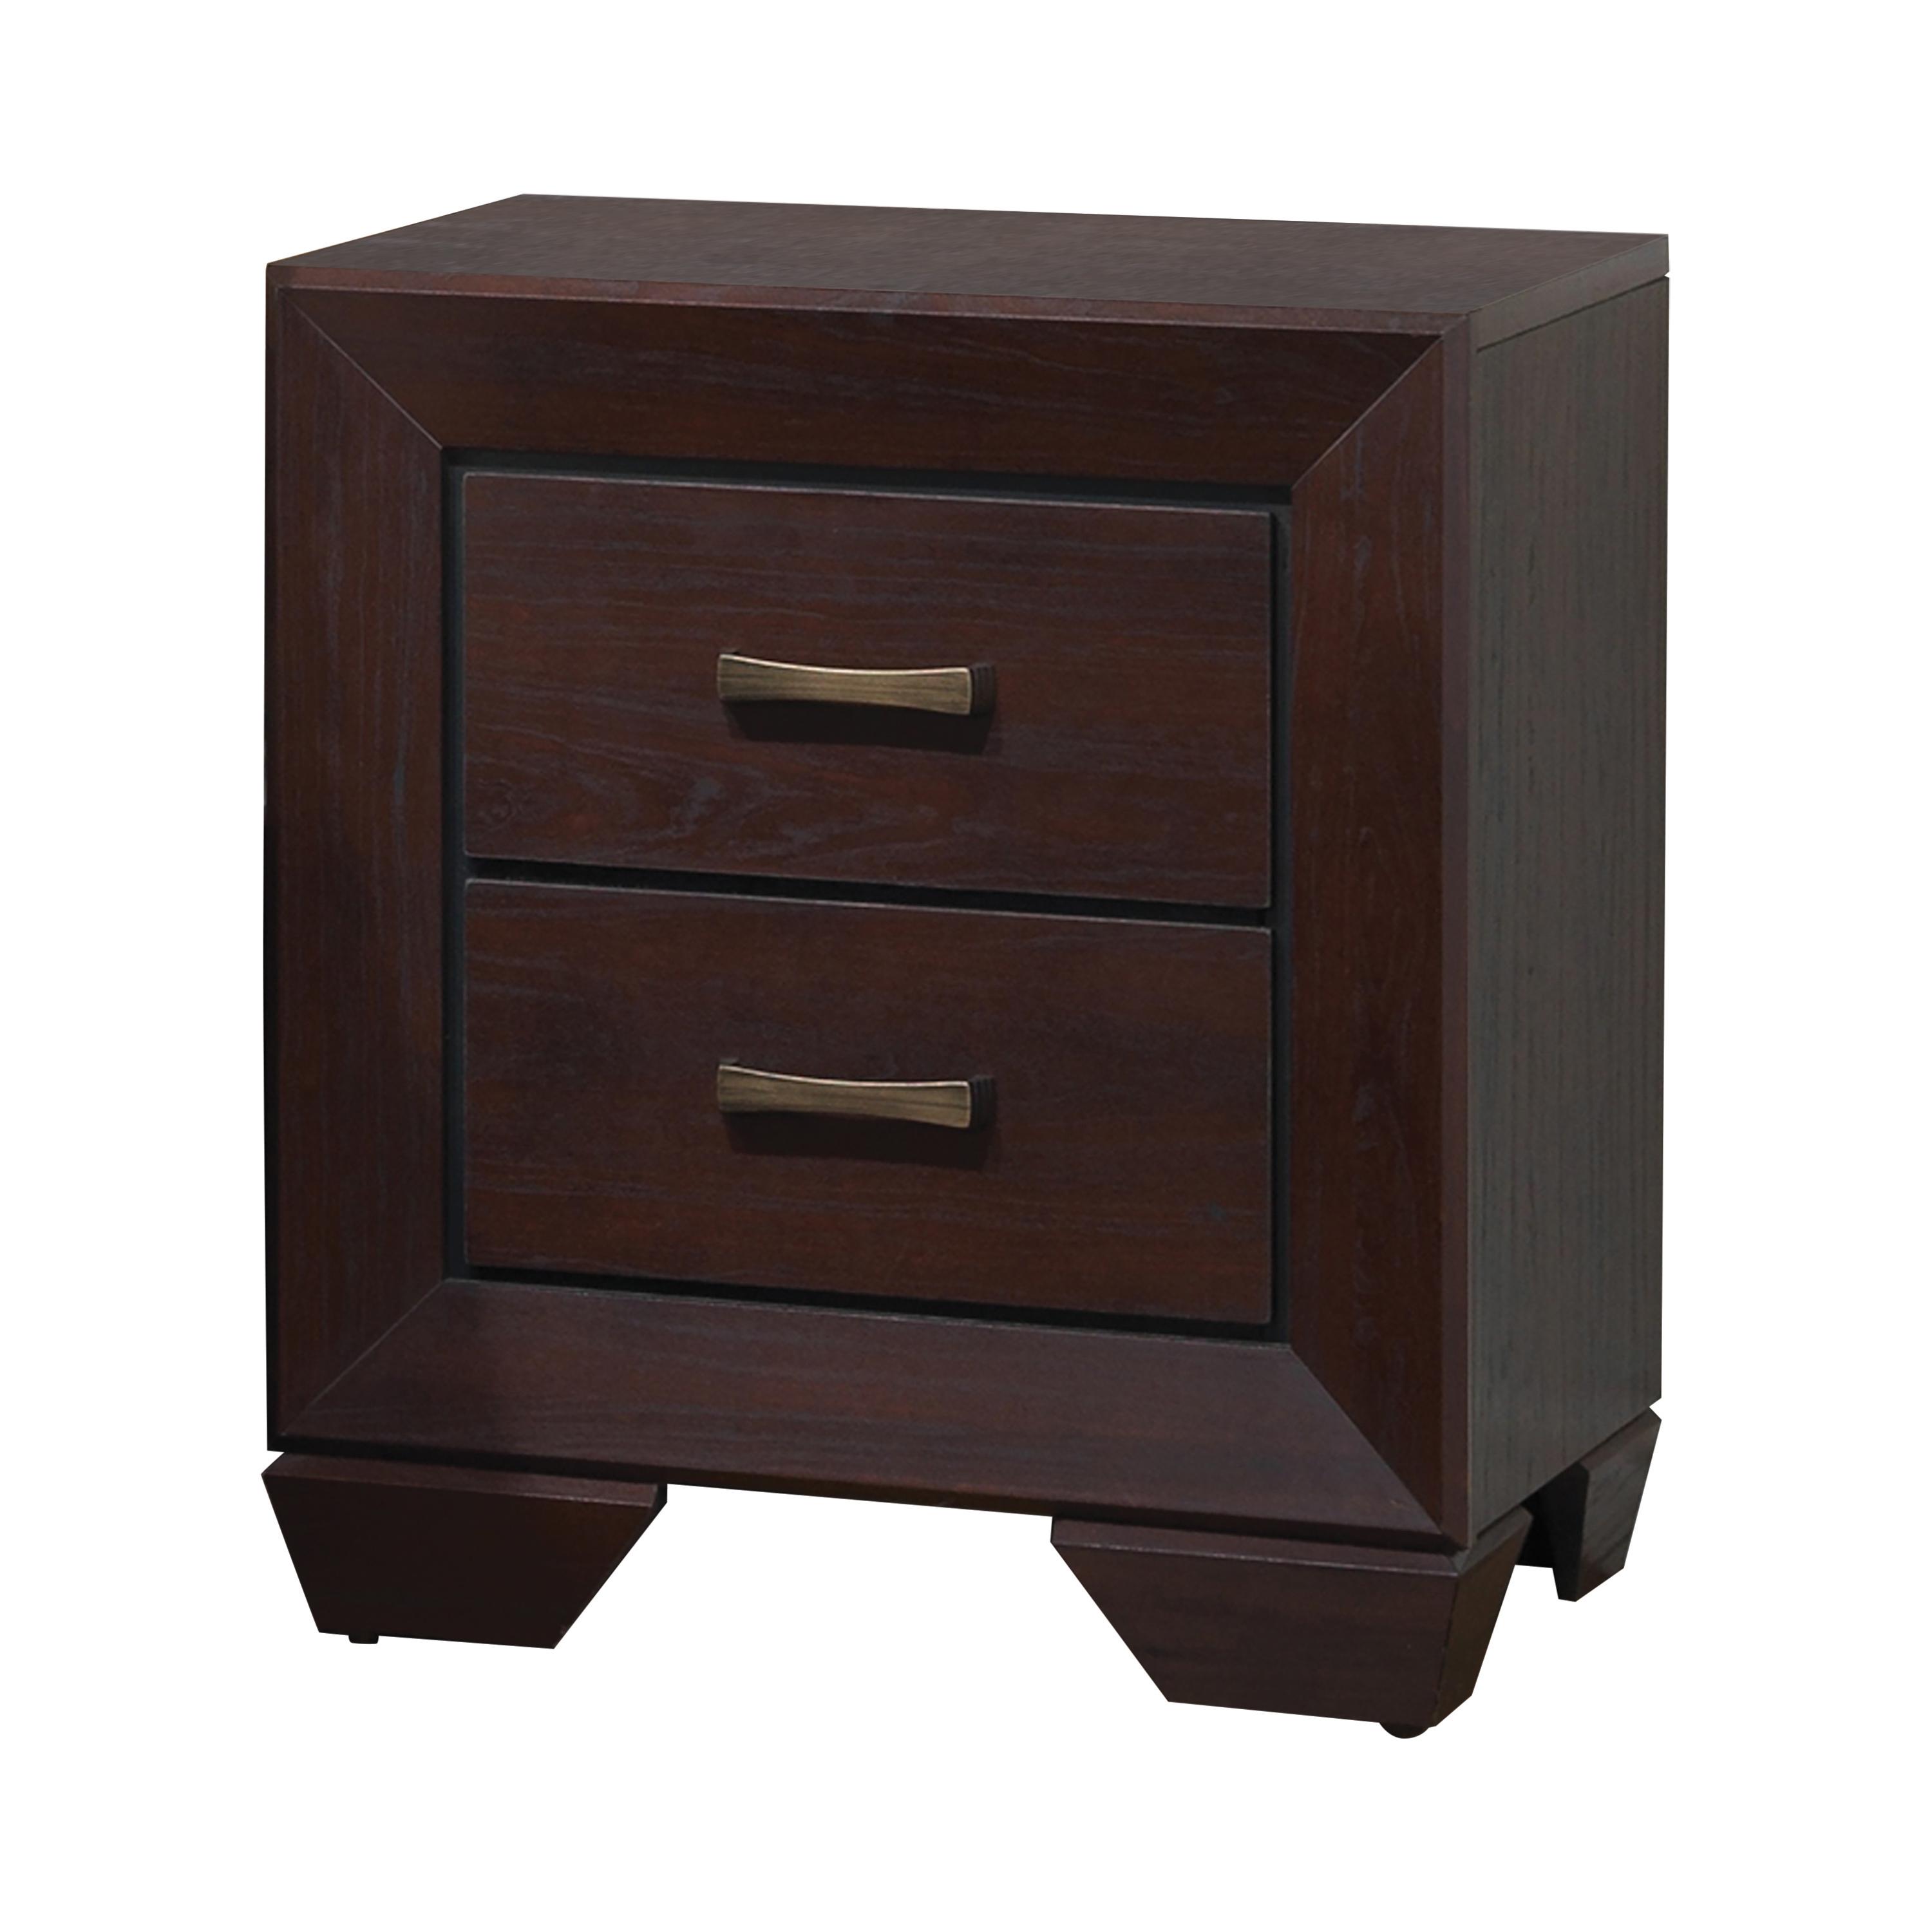 Transitional Nightstand 204392 Kauffman 204392 in Cocoa 